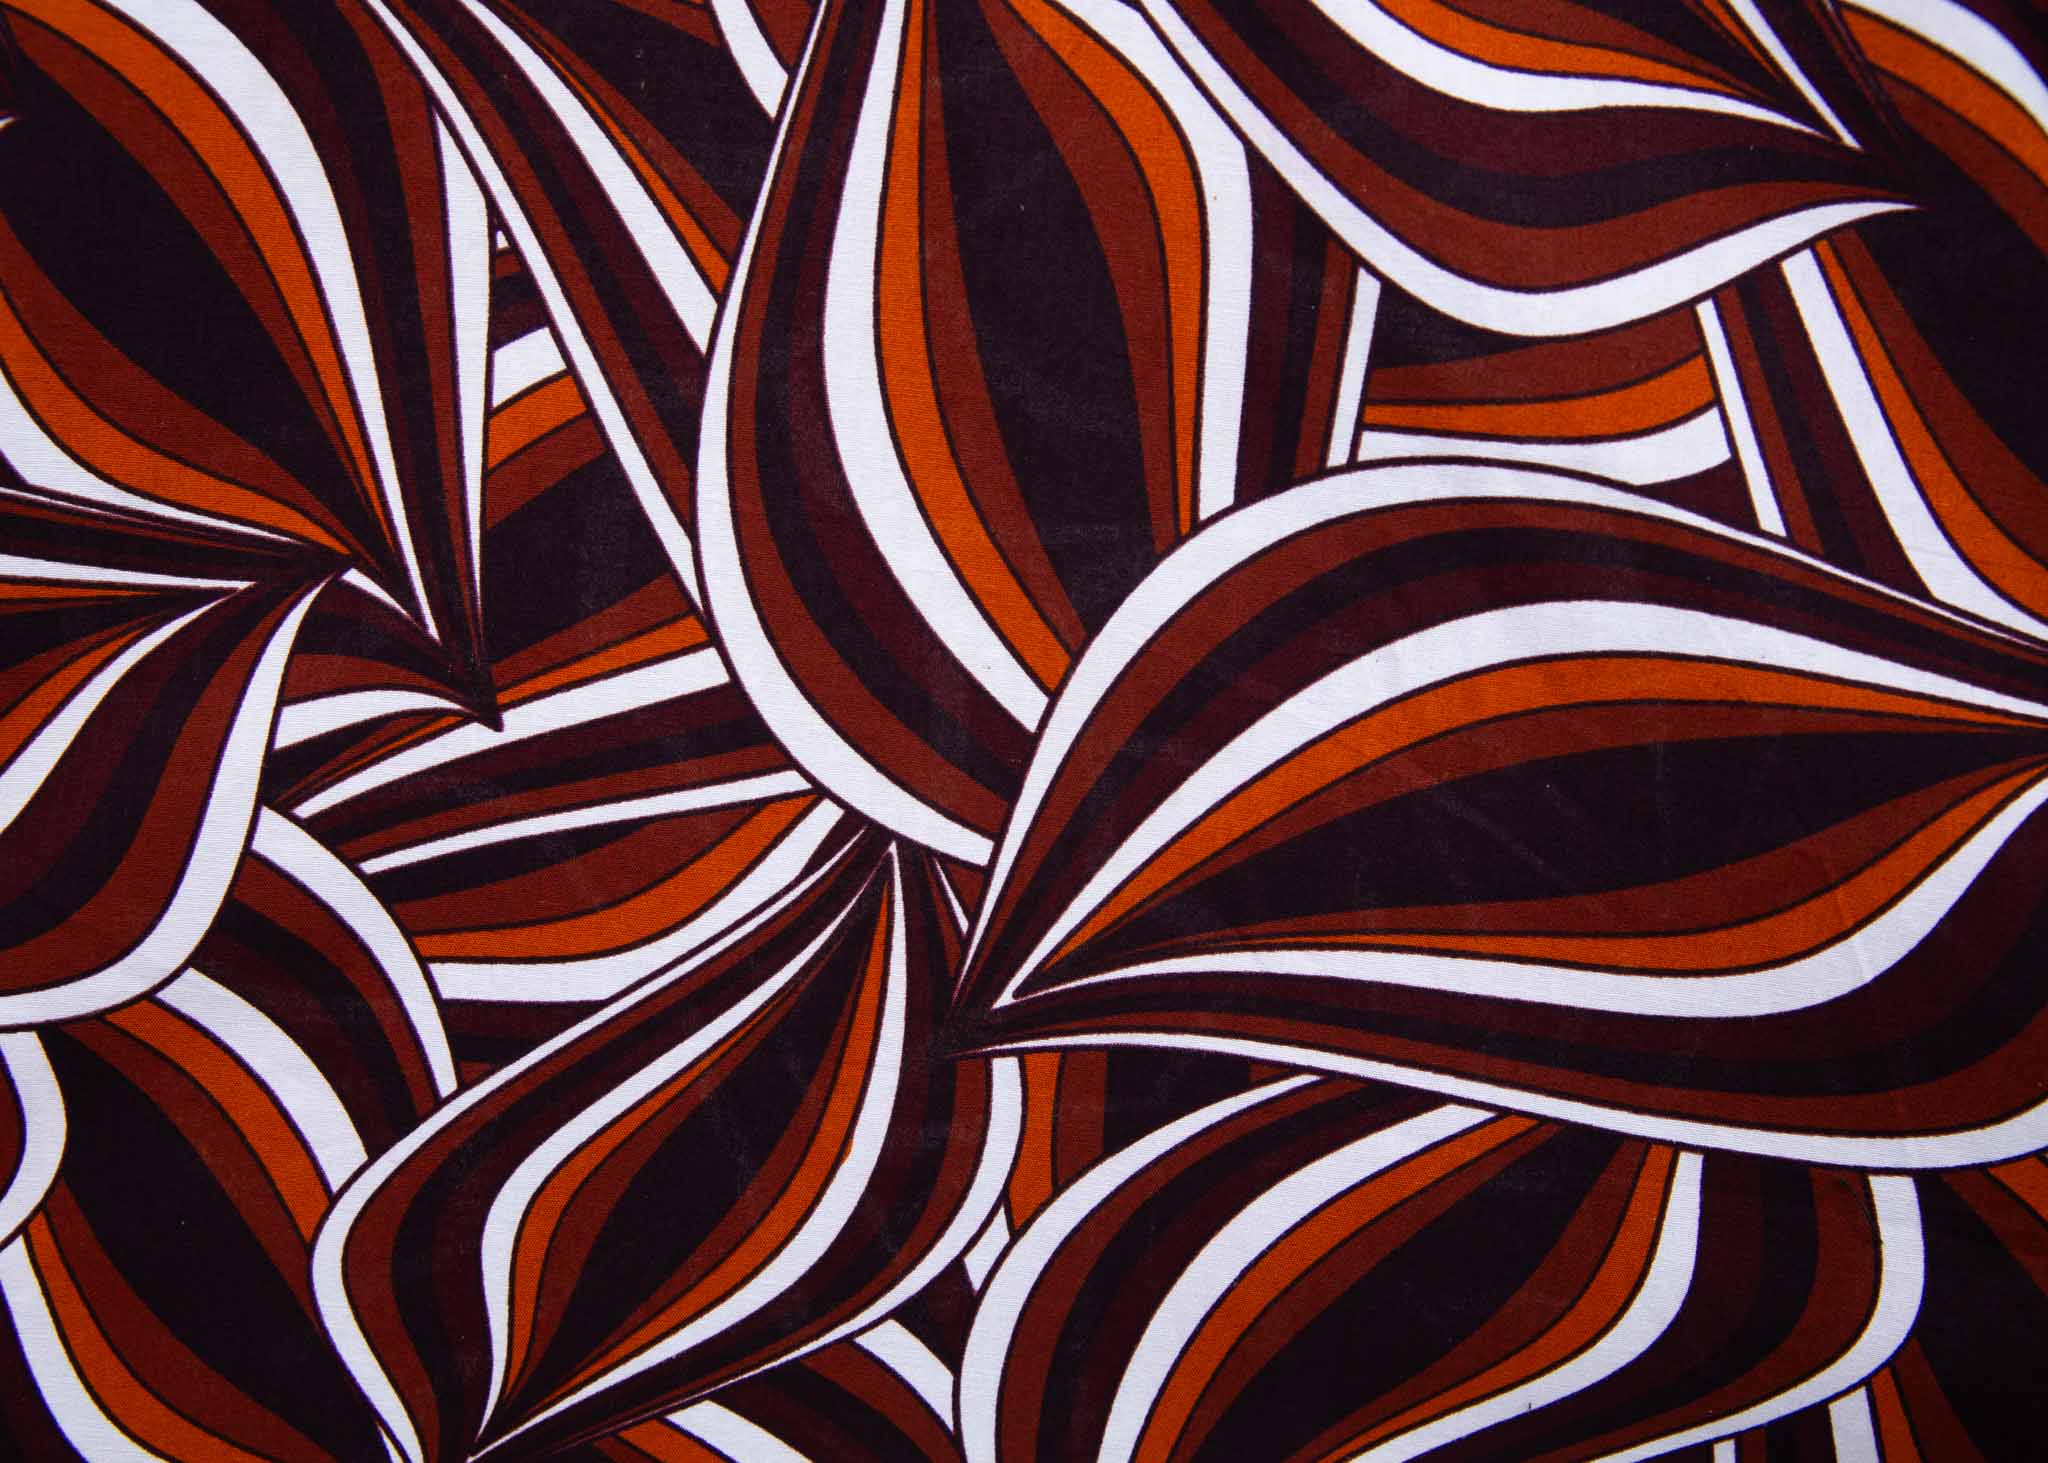 Close up display of brown, orange, burgundy and white abstract print dress, fabric.